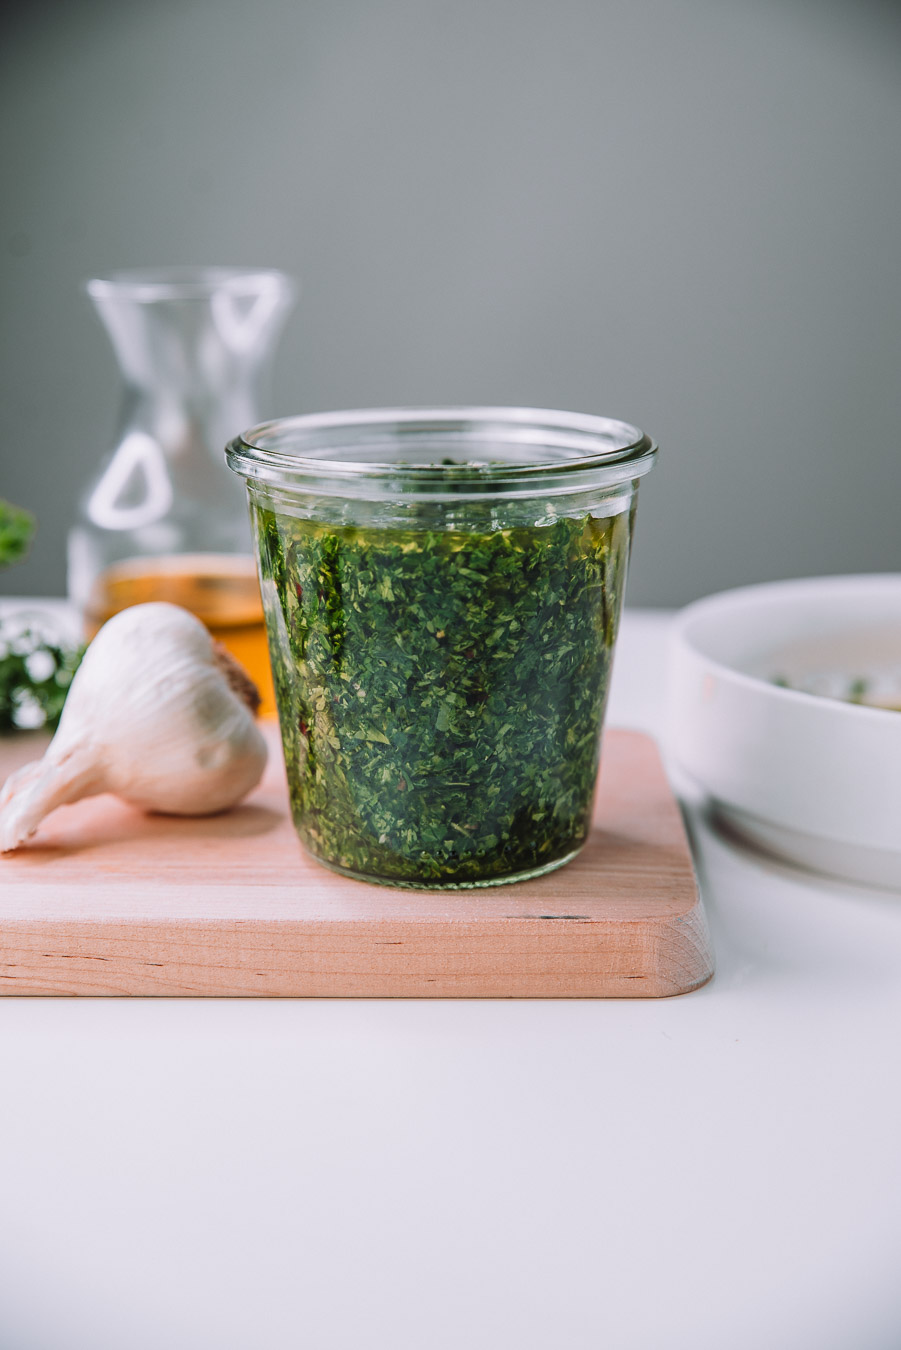 Kale Chimichurri Sauce made with Nature's Greens Kale.